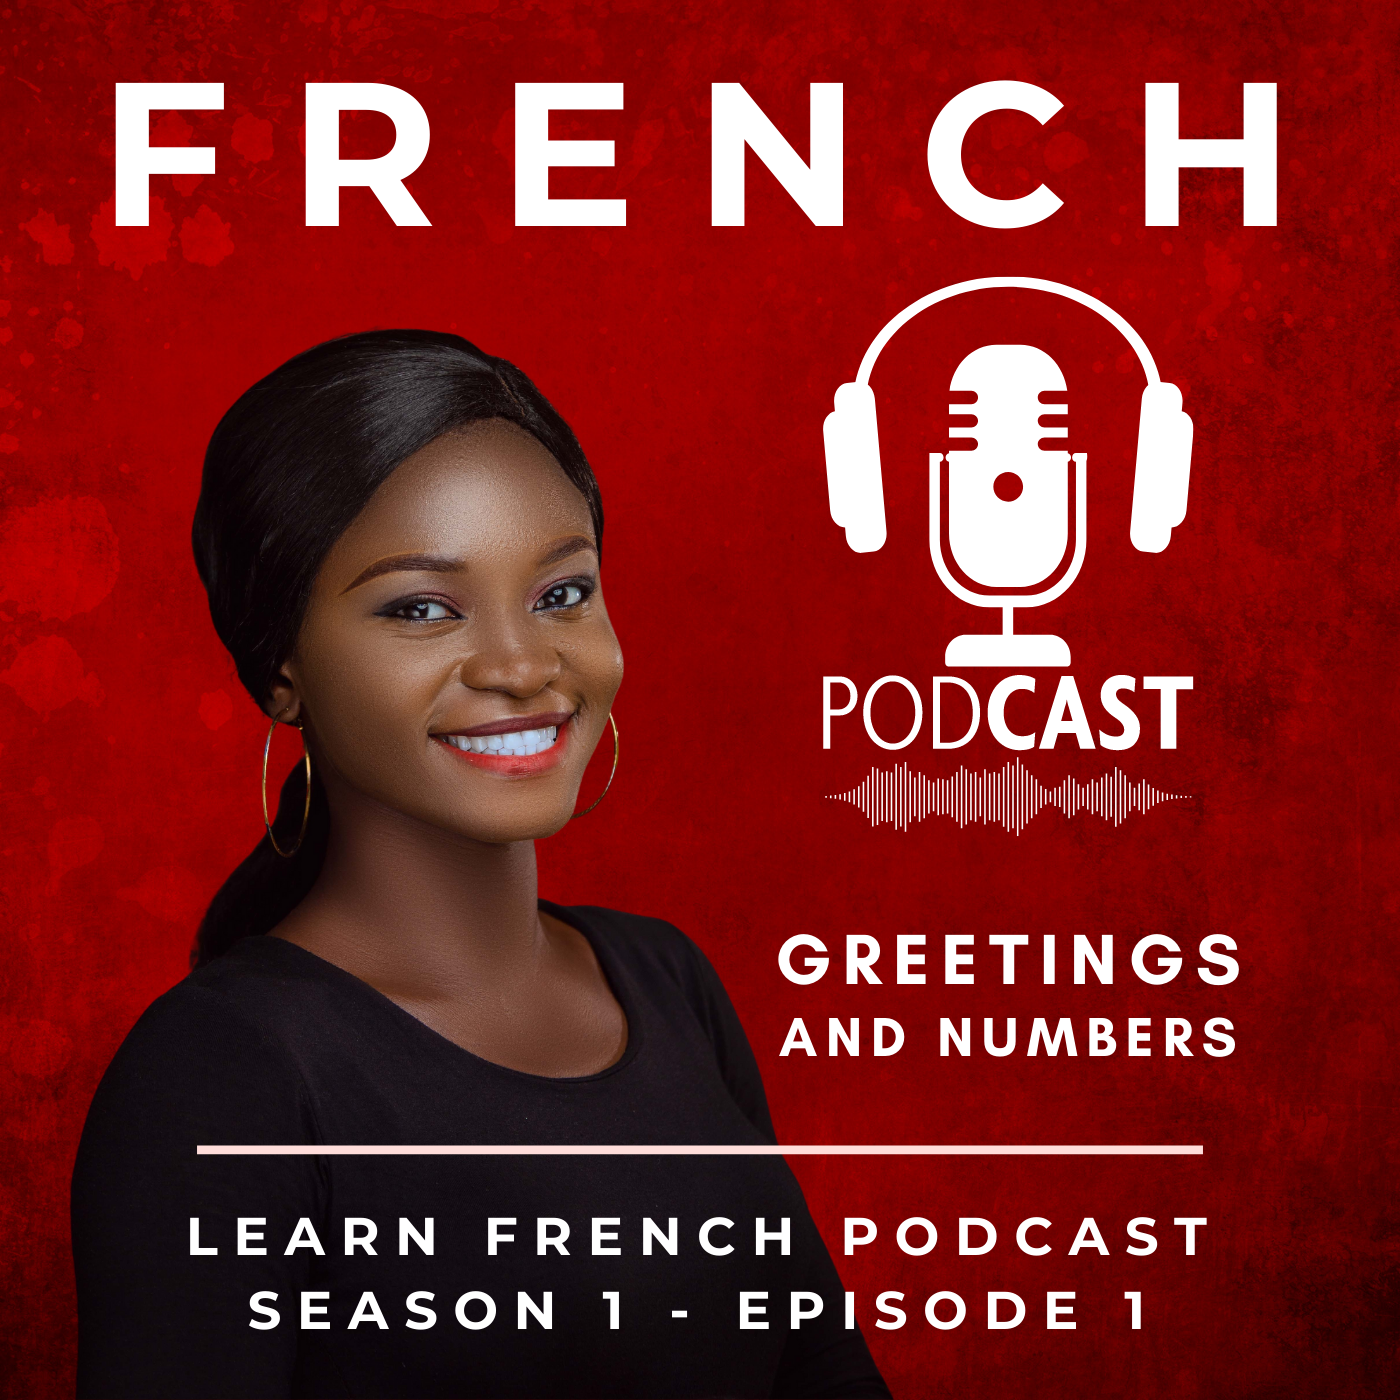 Learn French Podcast: Greetings and Numbers (Season 1, Episode 1)